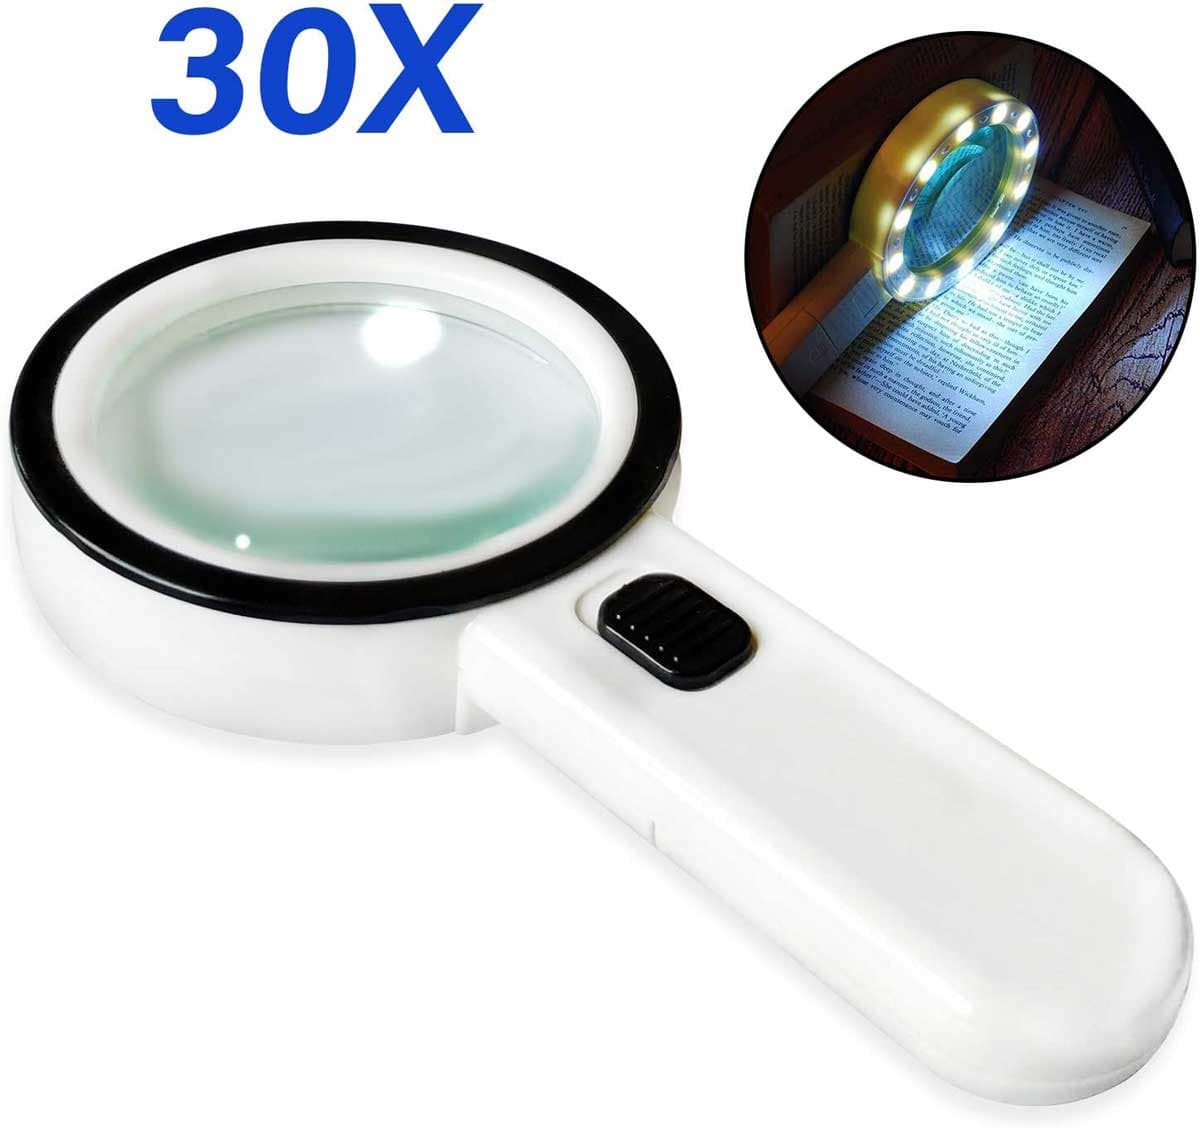 30x Handheld Magnifying Glass With 6 Led Lamp Optics Lens Great